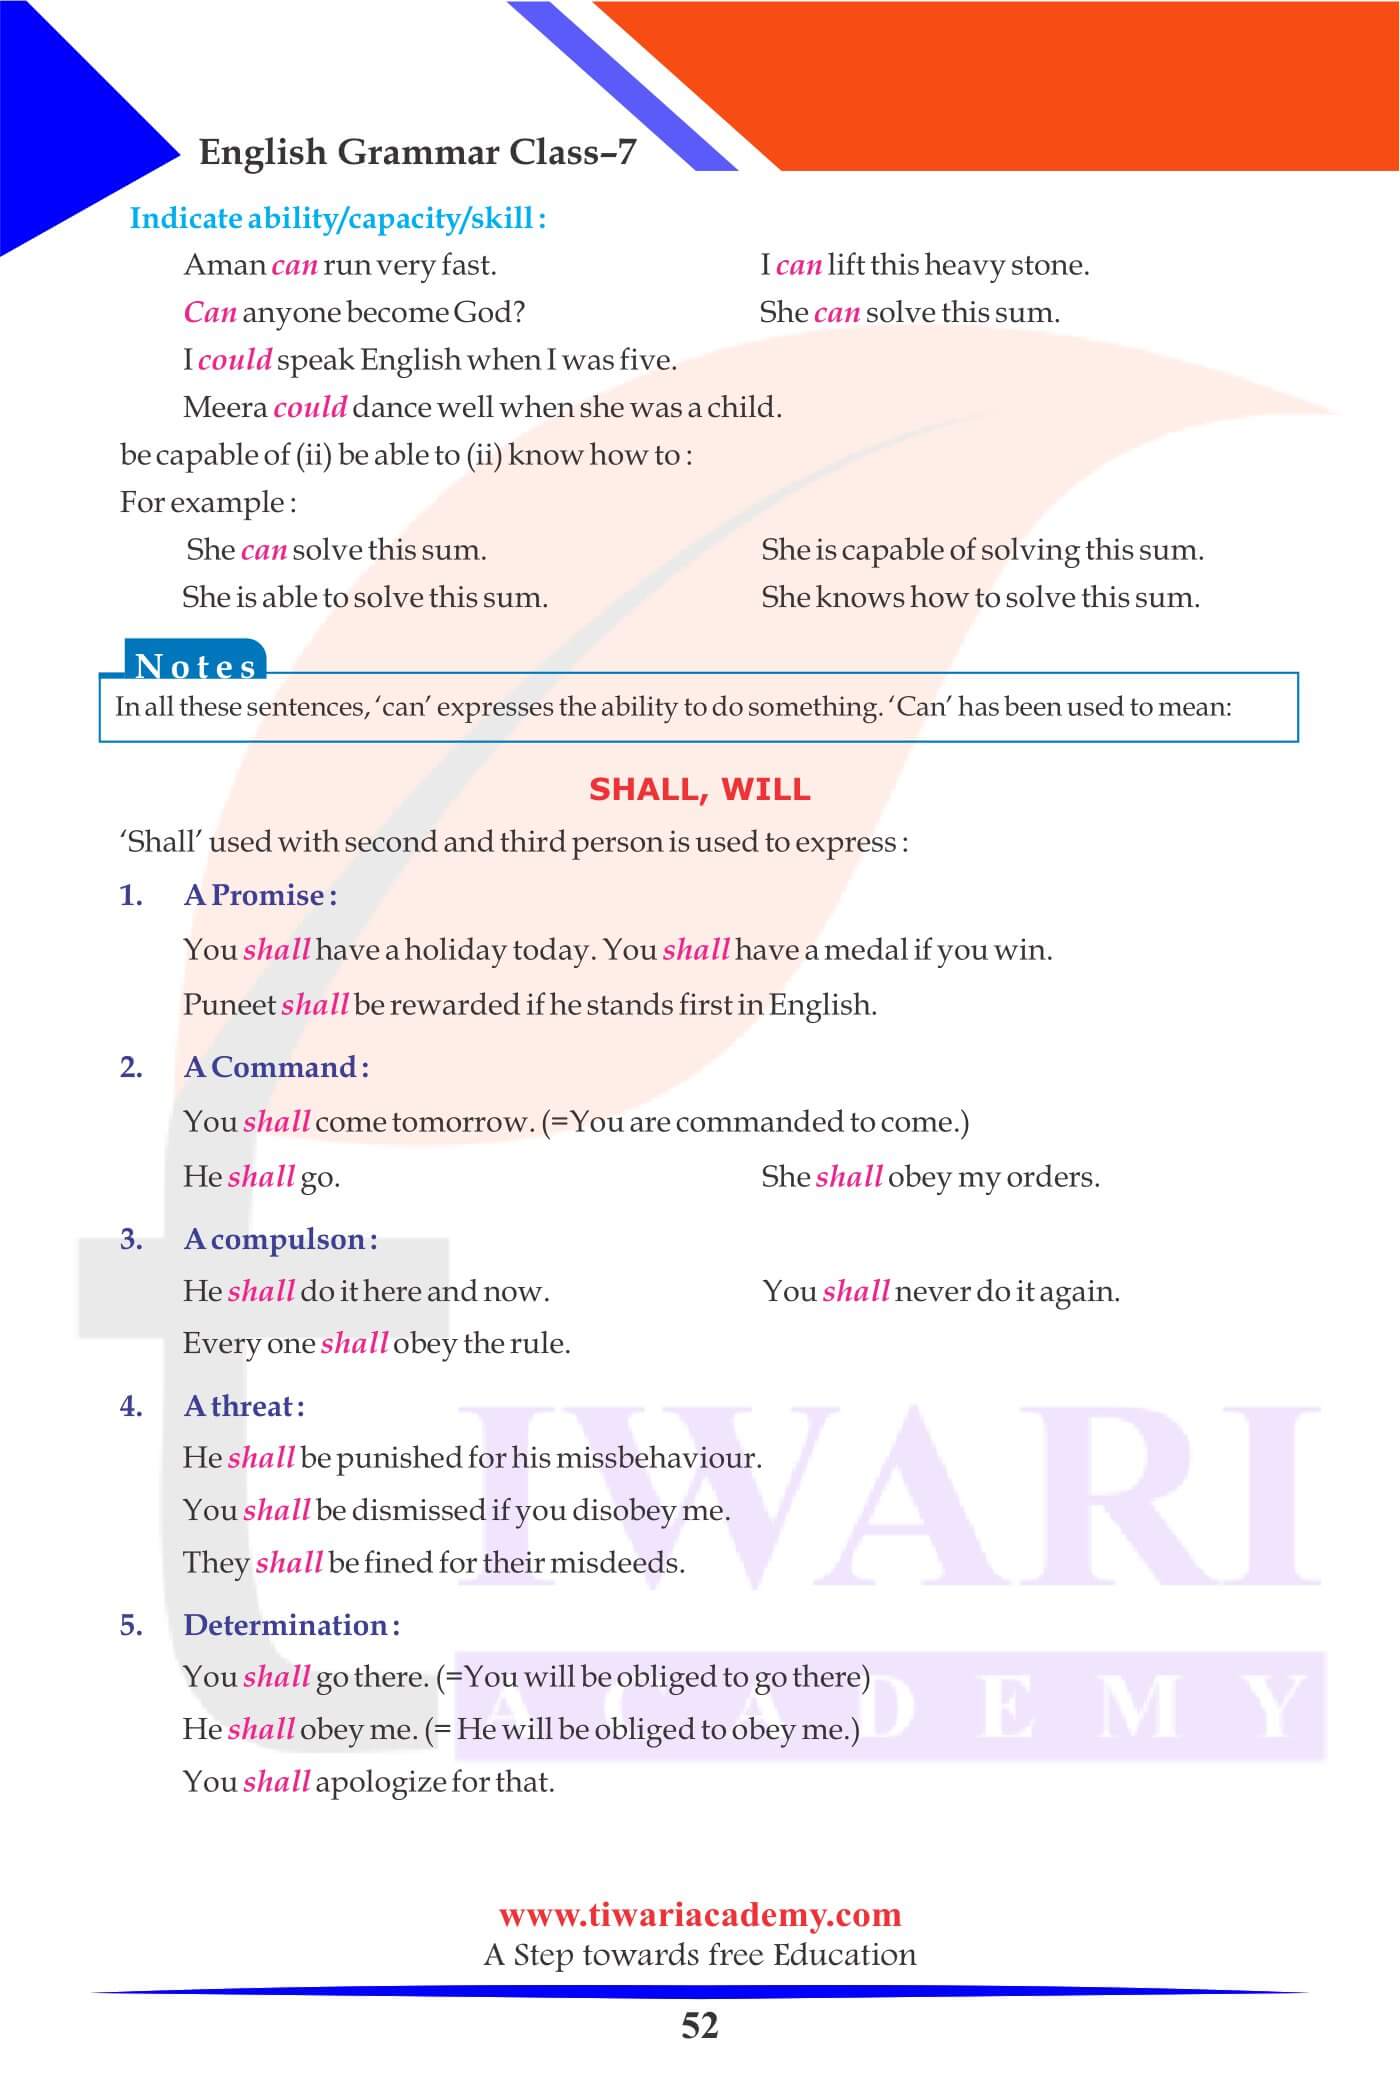 Class 7 English Grammar Chapter 8 Practice questions